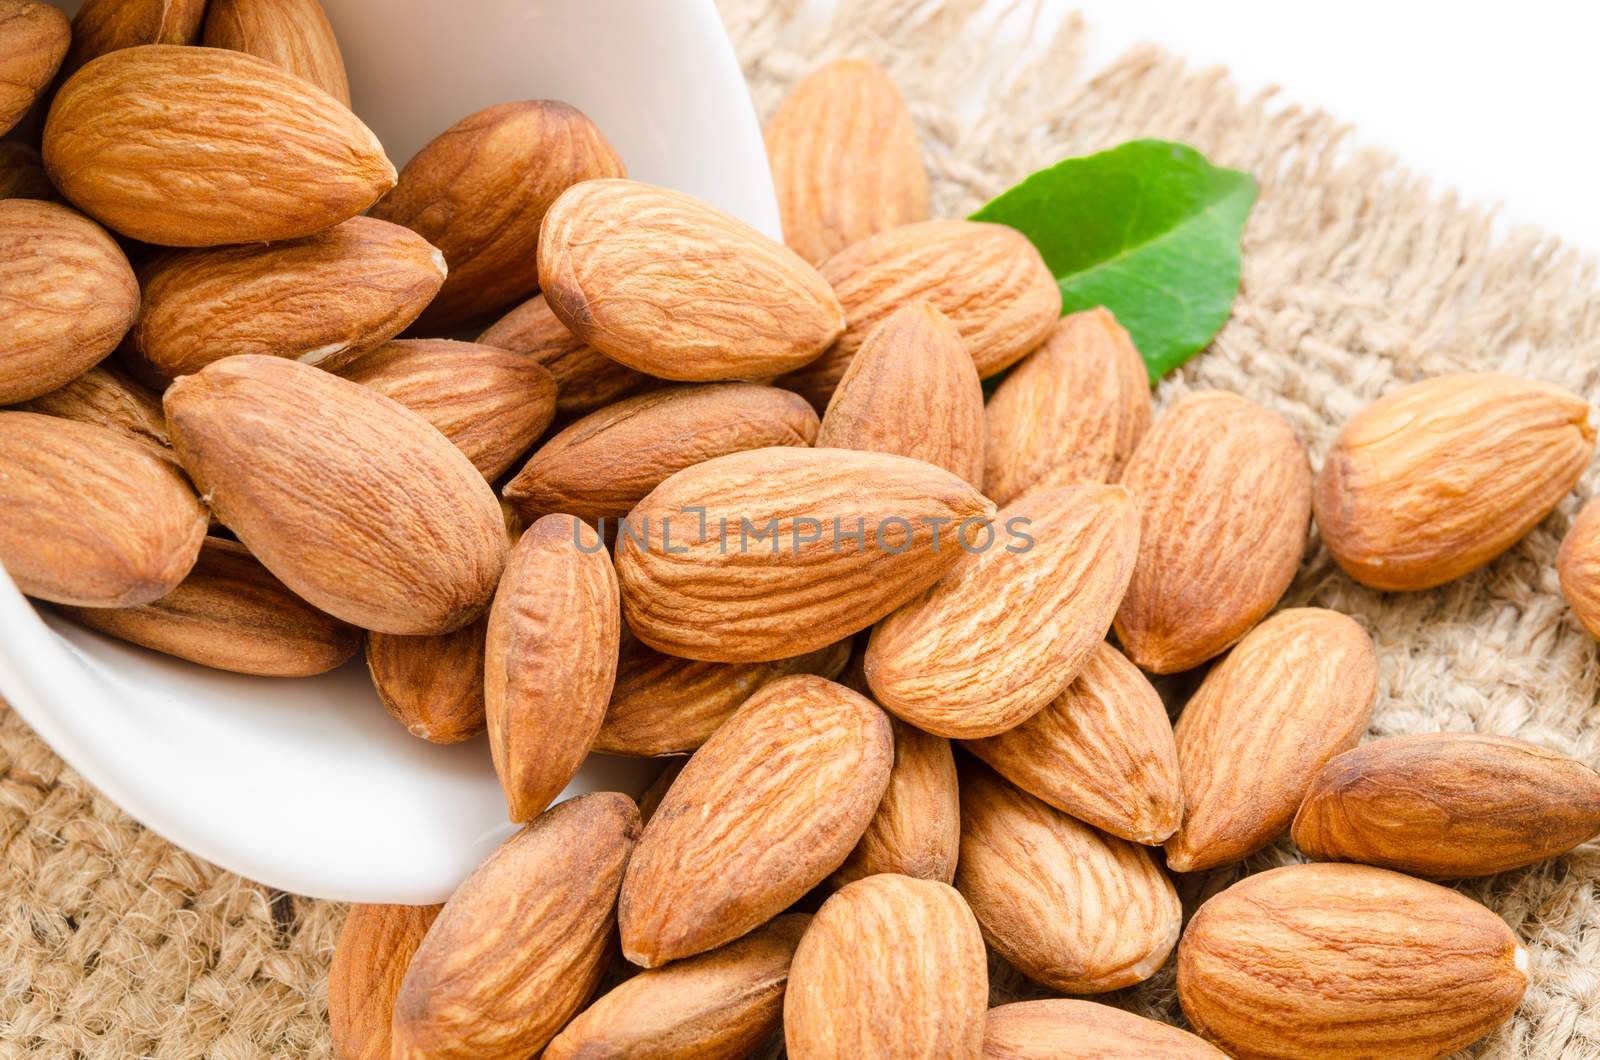 Almonds in white bowl with green leaf on sack background.